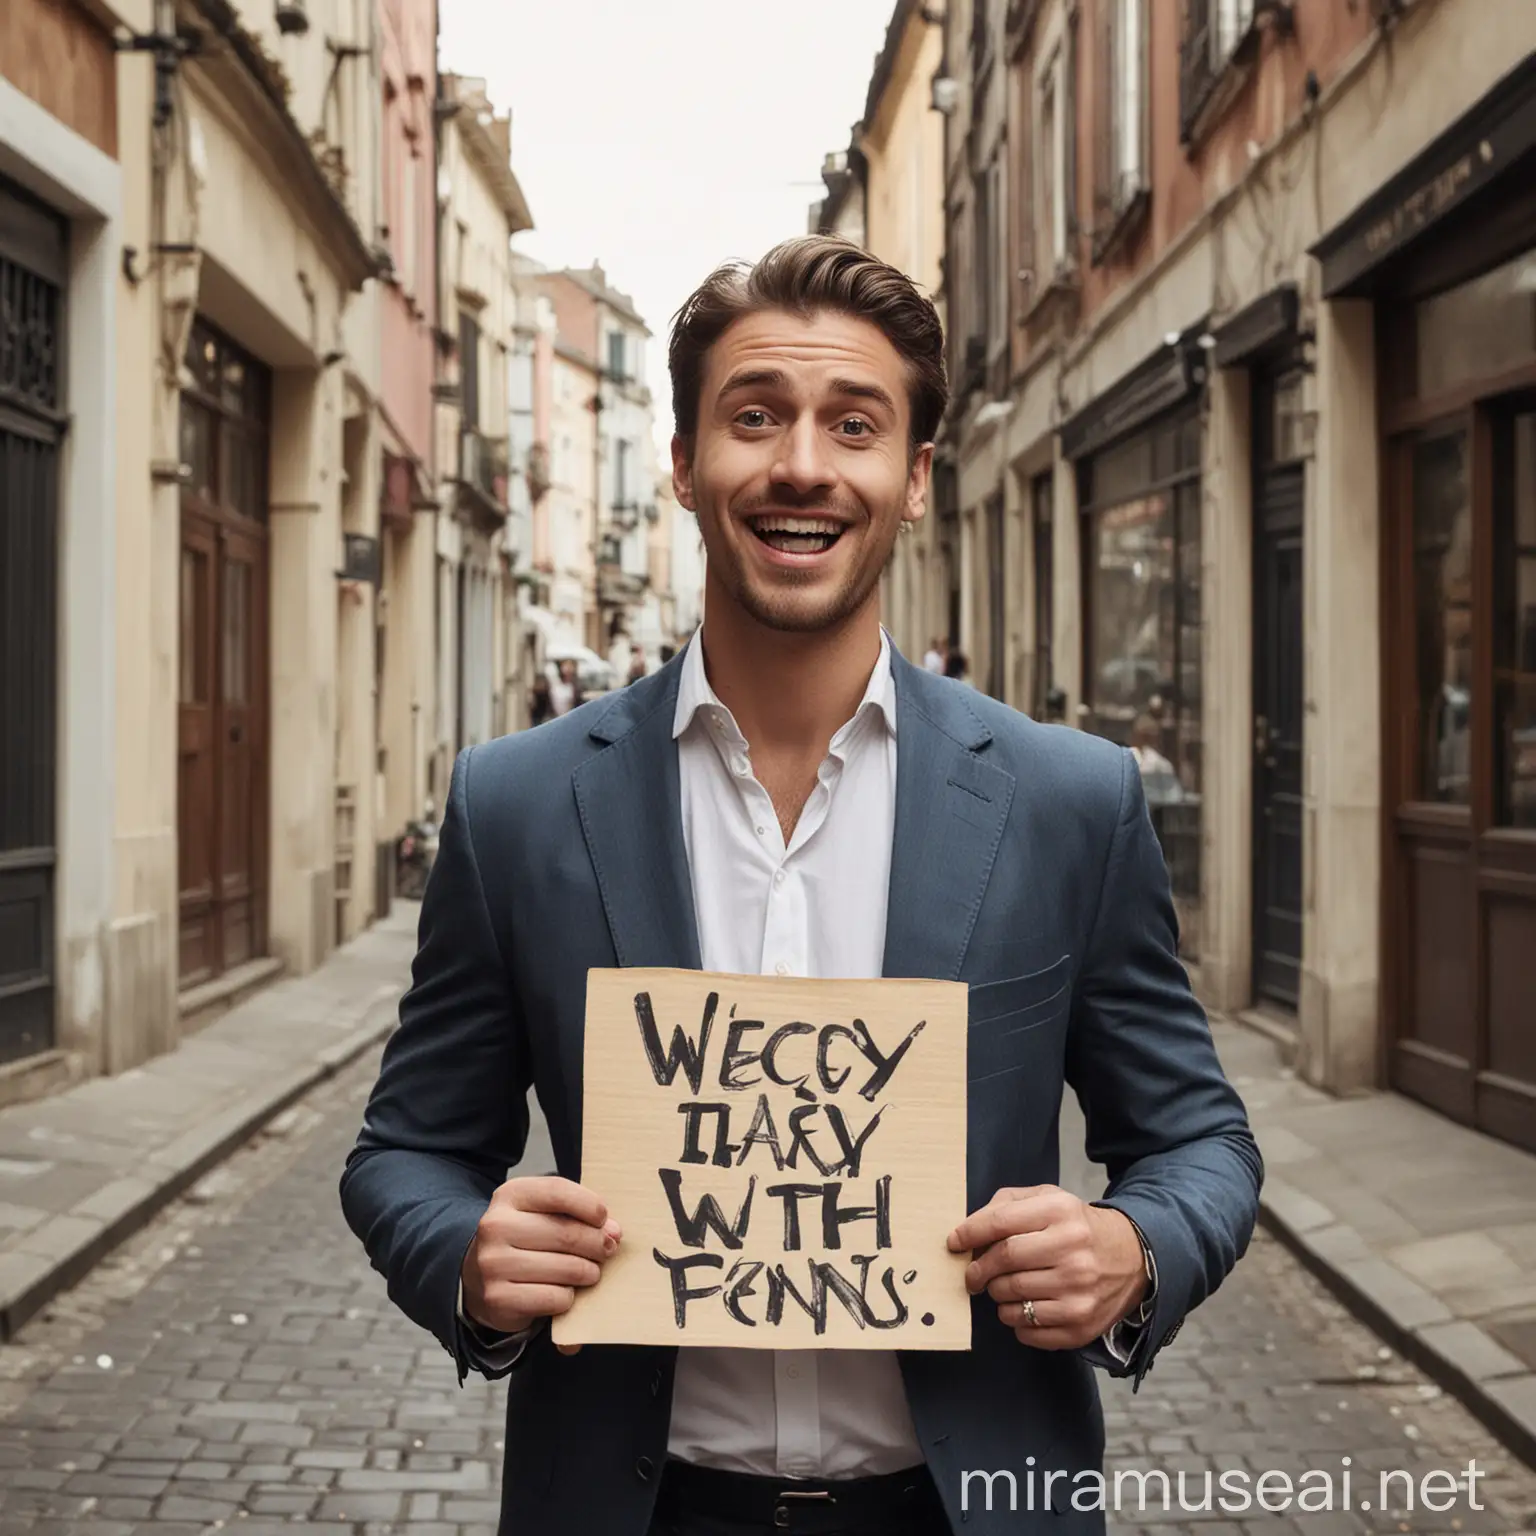 WellDressed Man Holding Funny Sign in Casual Setting